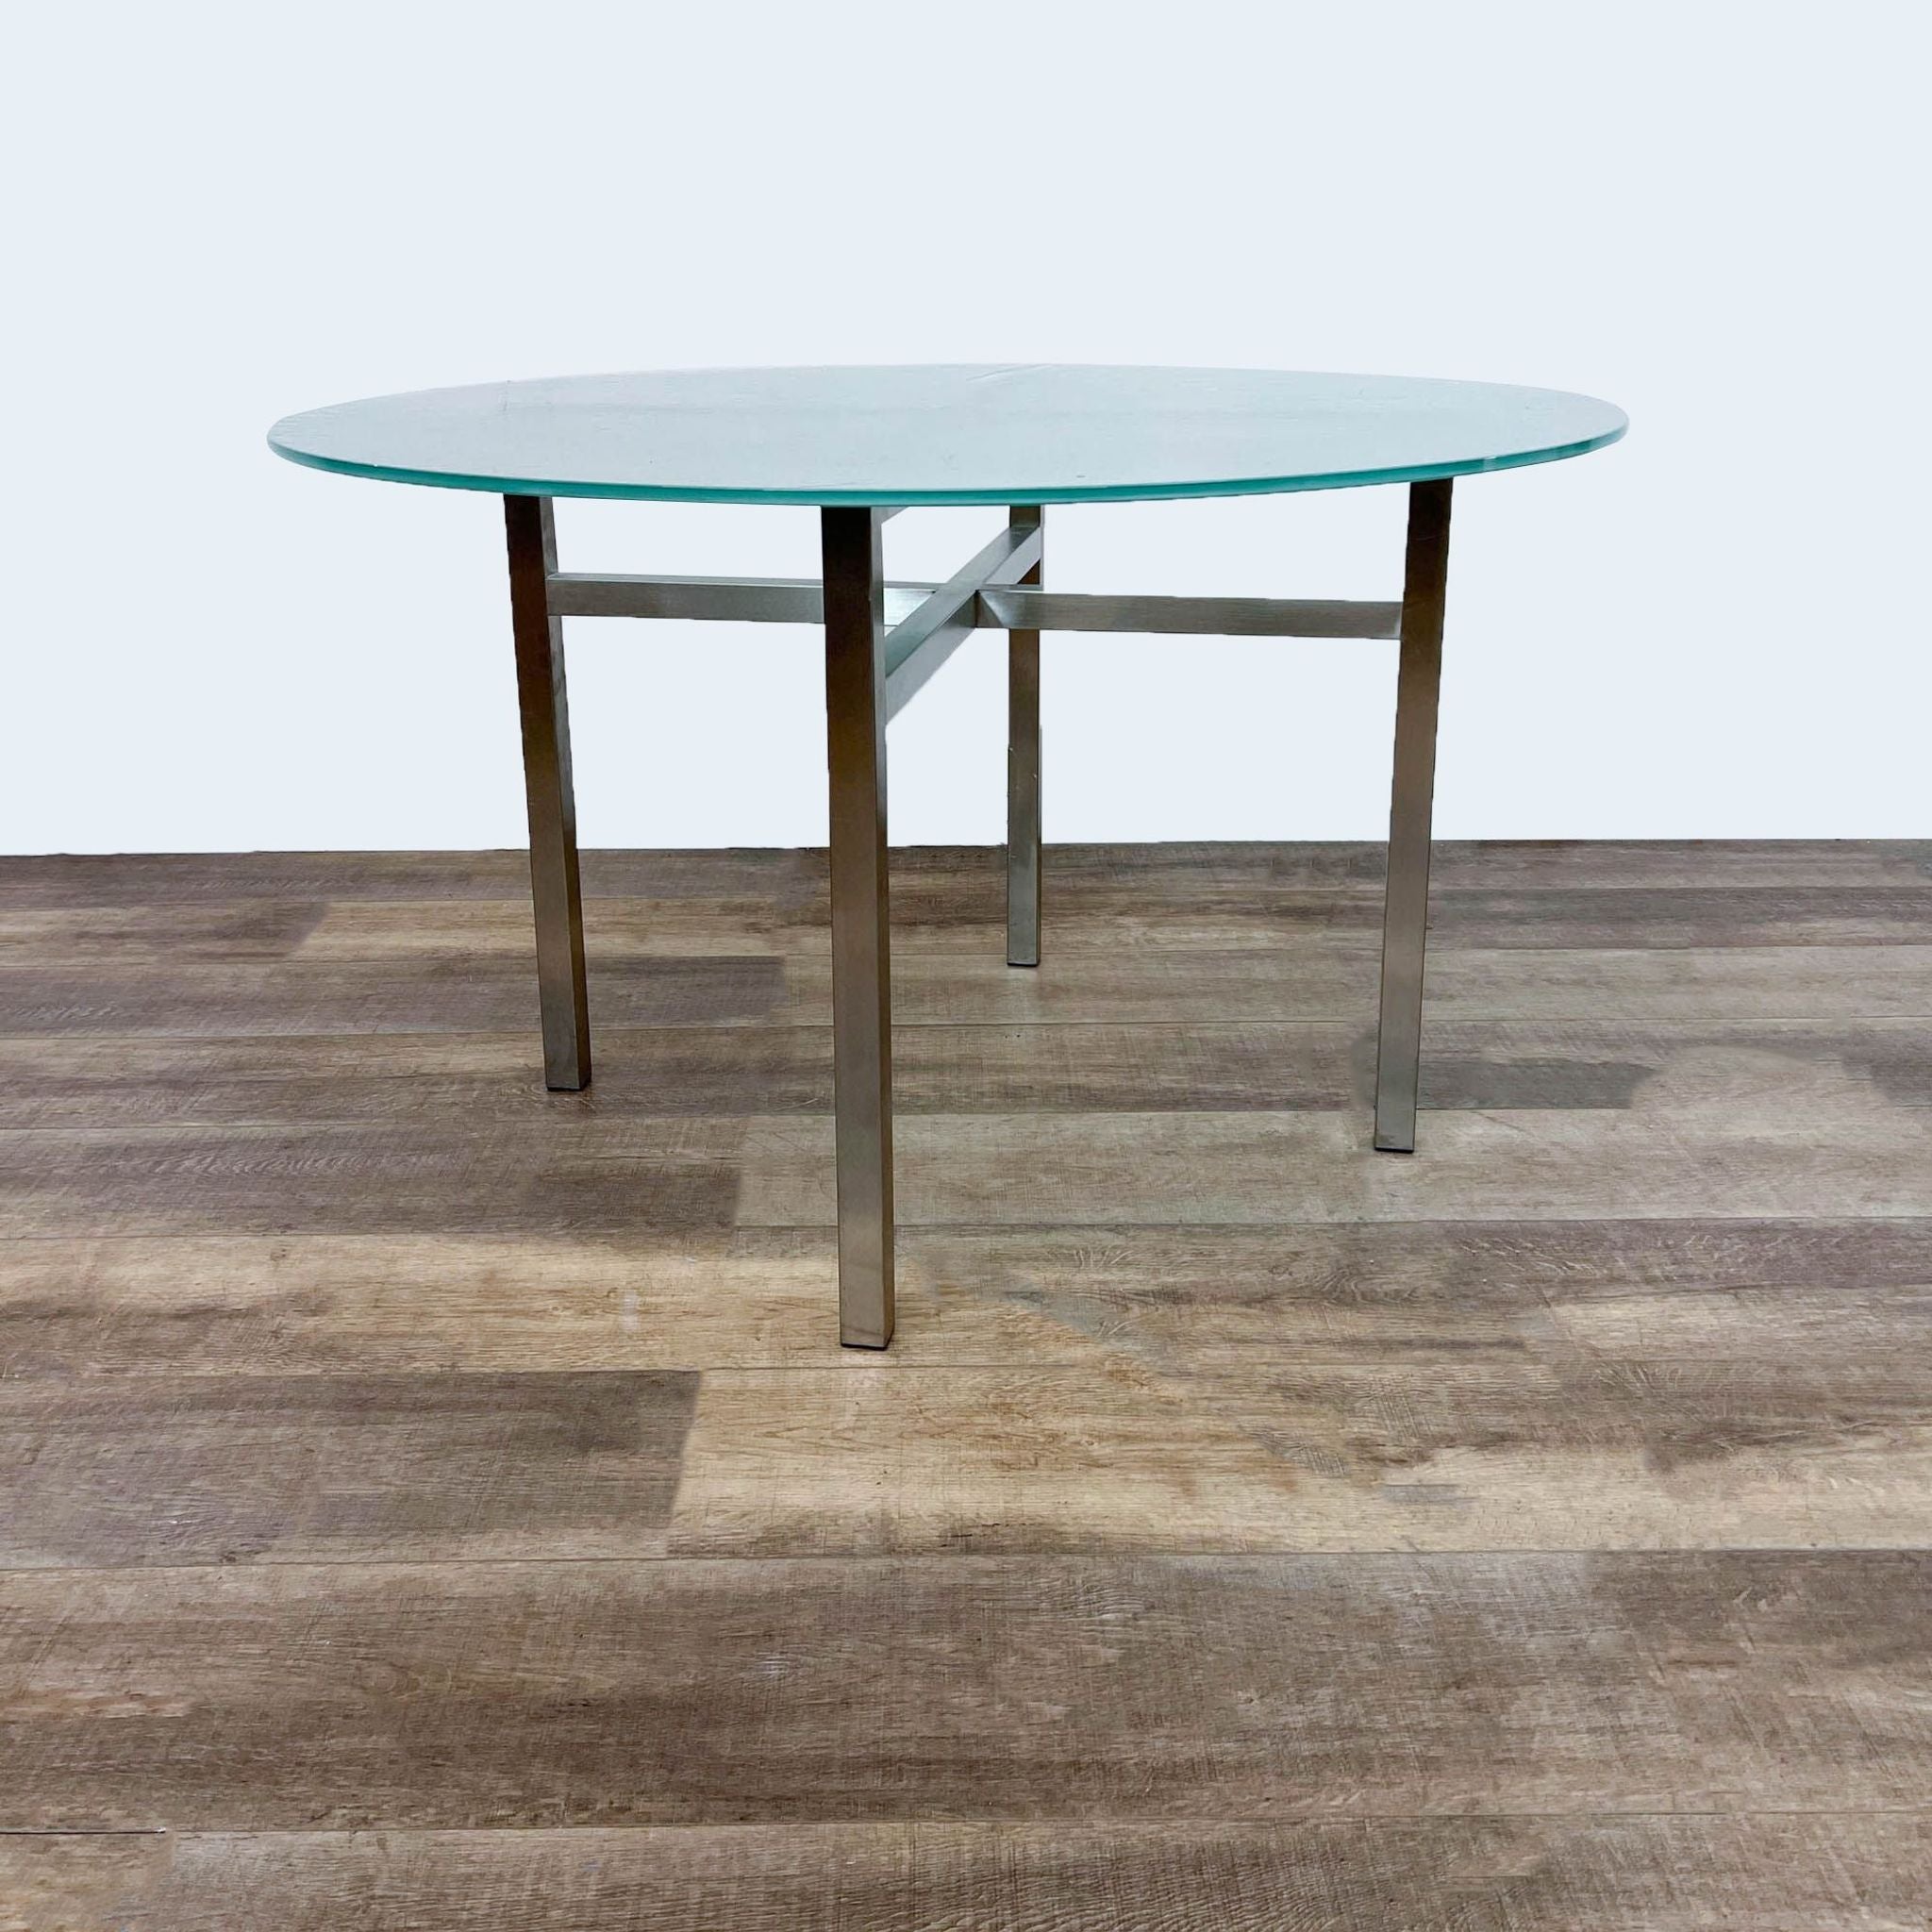 Room & Board Benson dining table with gold finish metal cross brace base and round frosted tempered glass top on a wooden floor.